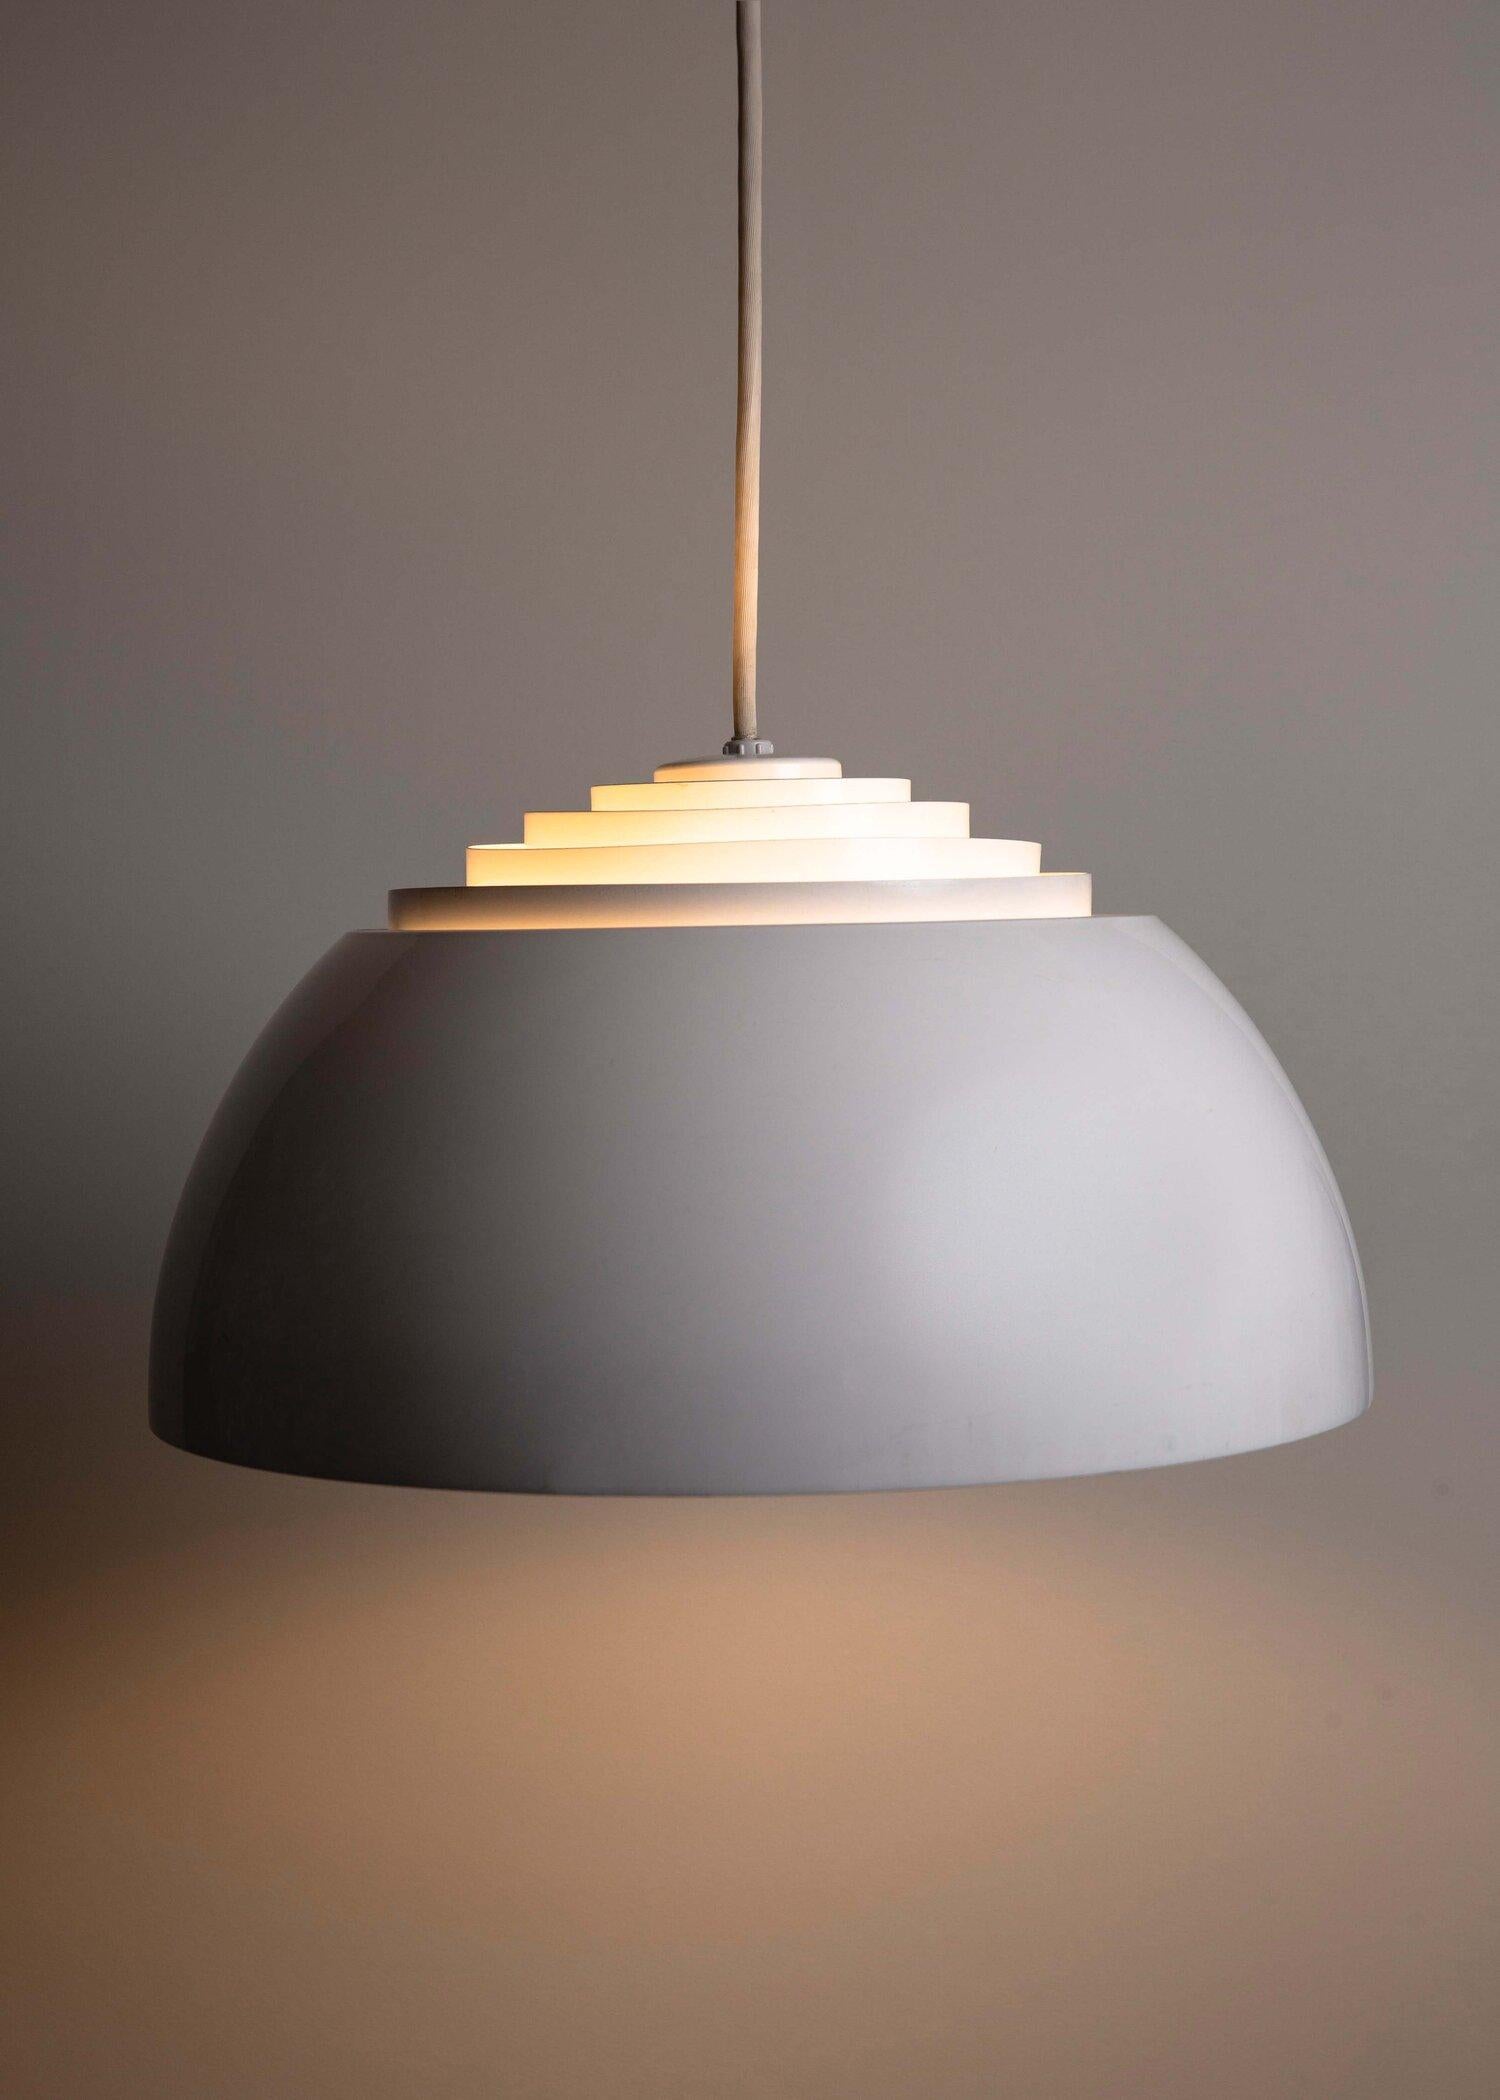 Louvered pendant lamp by Lightolier manufactured in the 1970’s. White enamelled aluminium, louvered top. 

Verified original E-26 Edison medium base socket, 18/2 round plastic cord. incandescent 60-100 watts max or higher if LED/CFL.